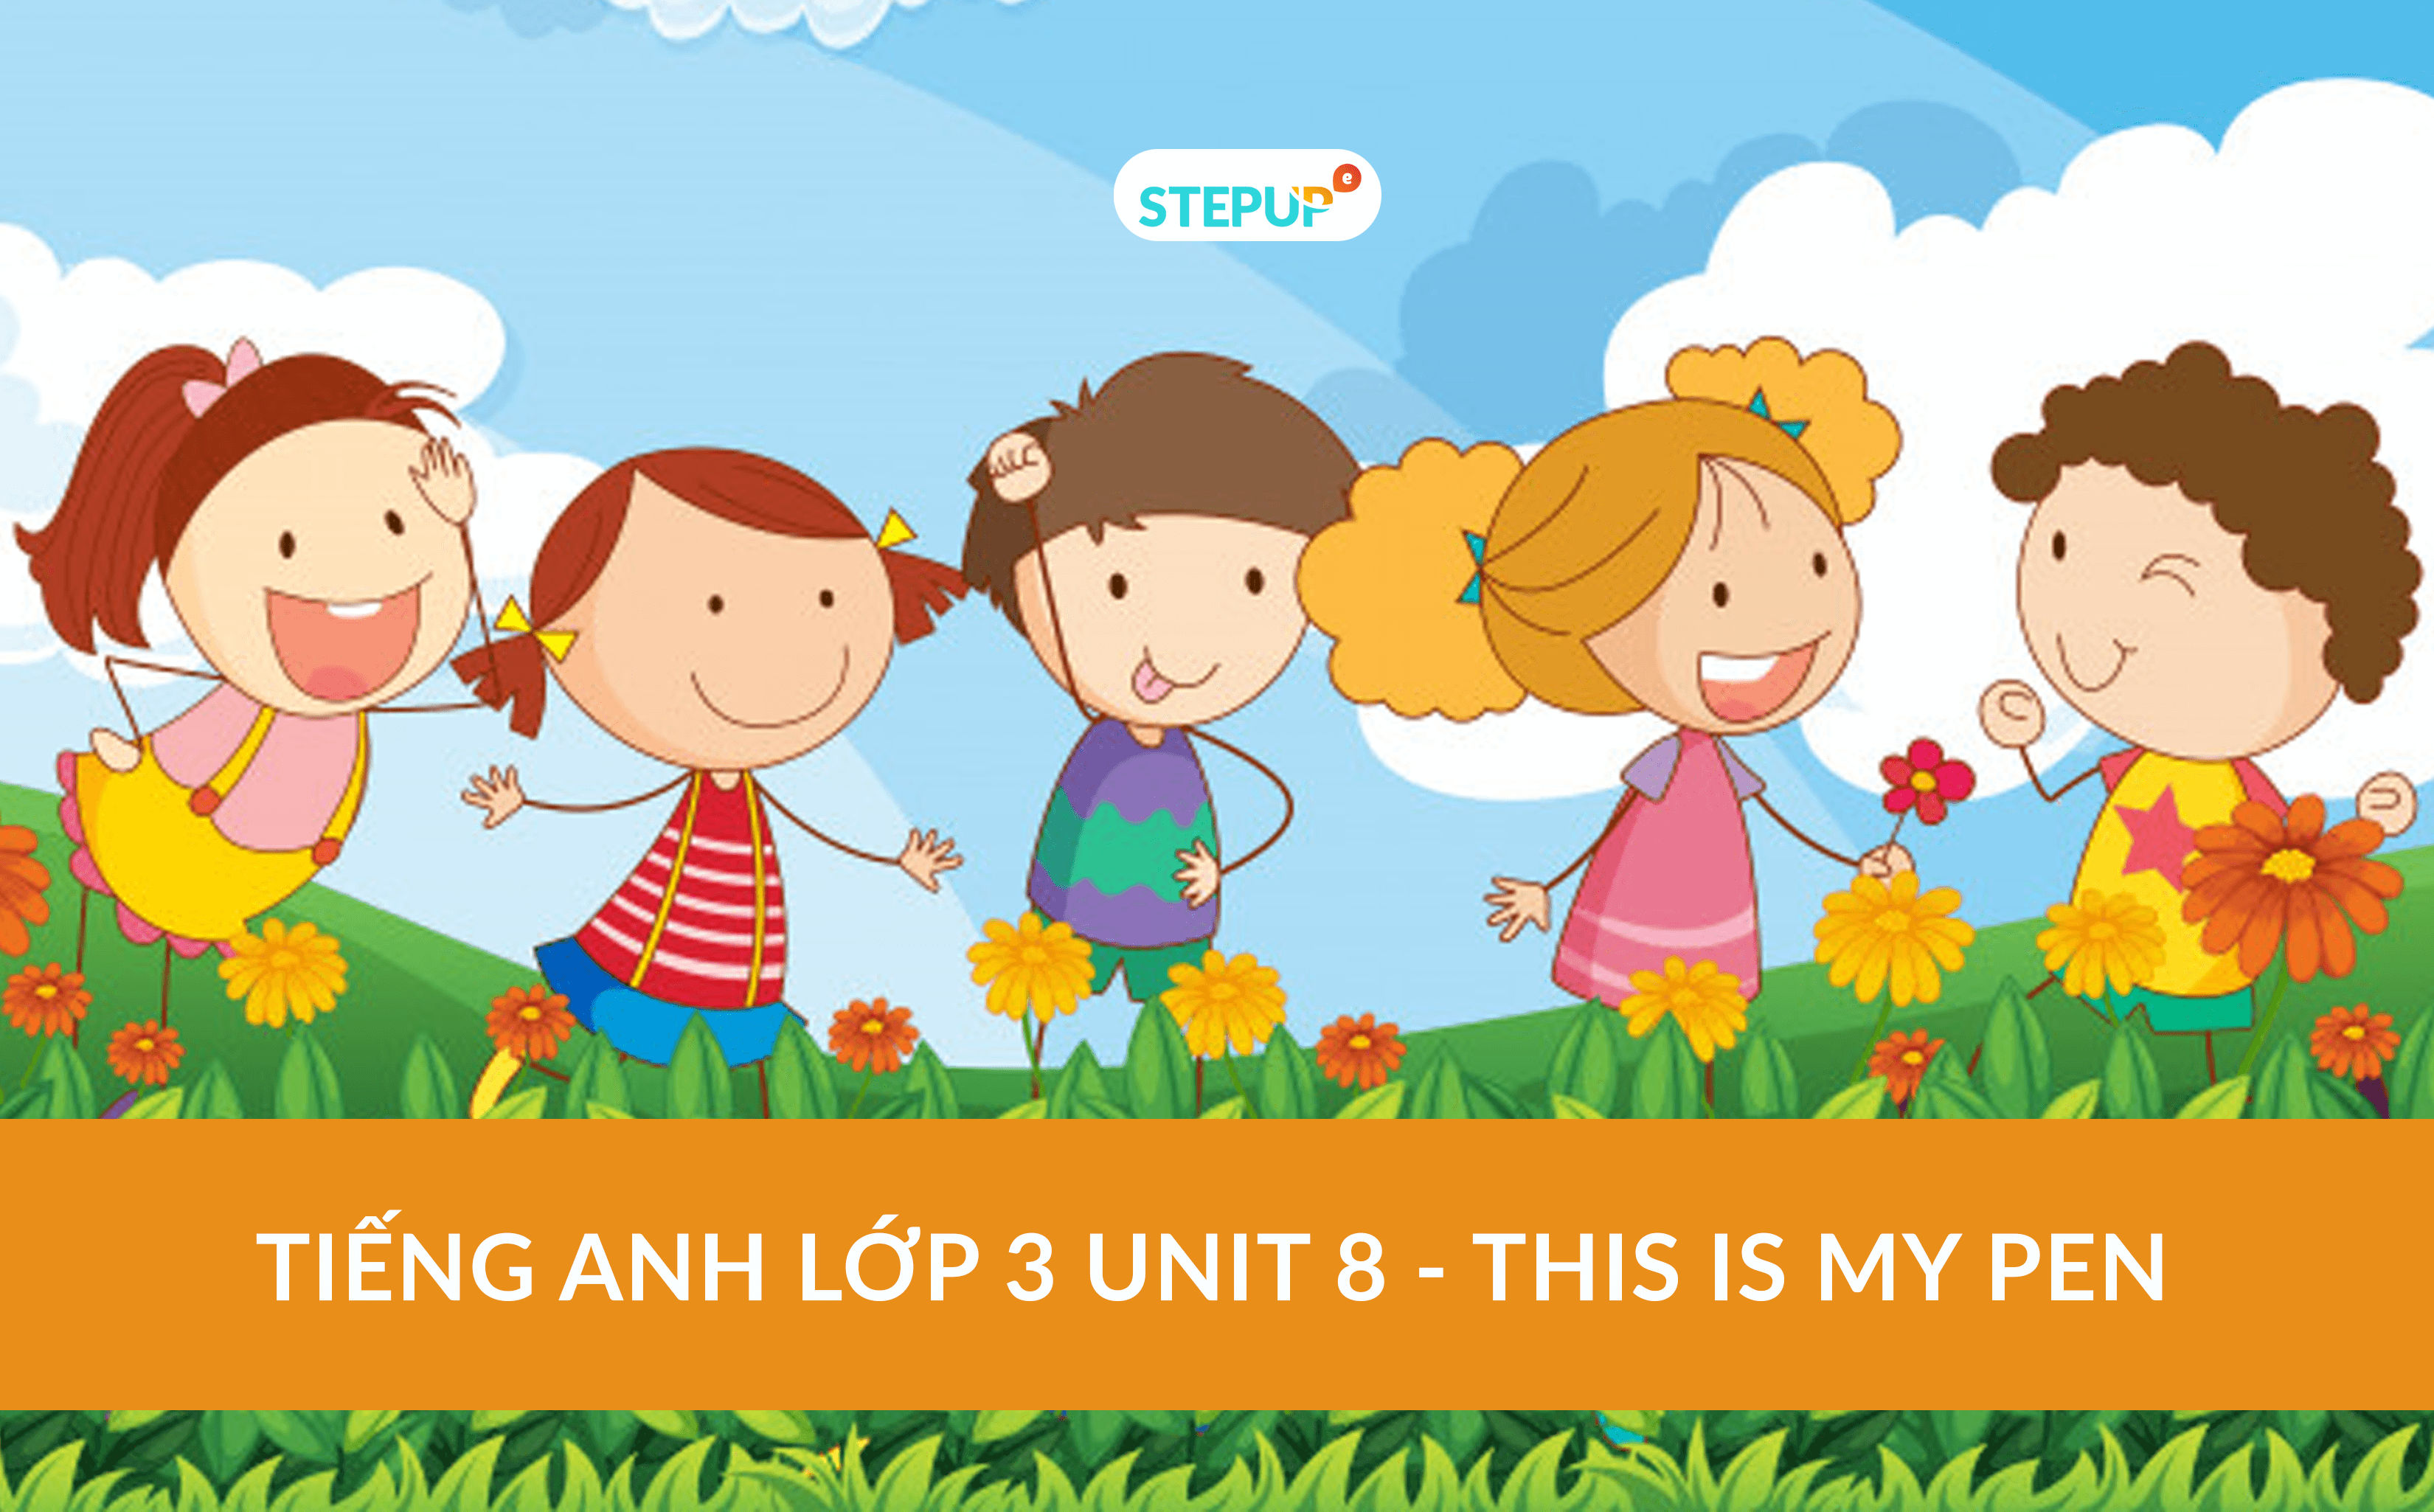 Tiếng Anh lớp 3 unit 8 - This is my pen